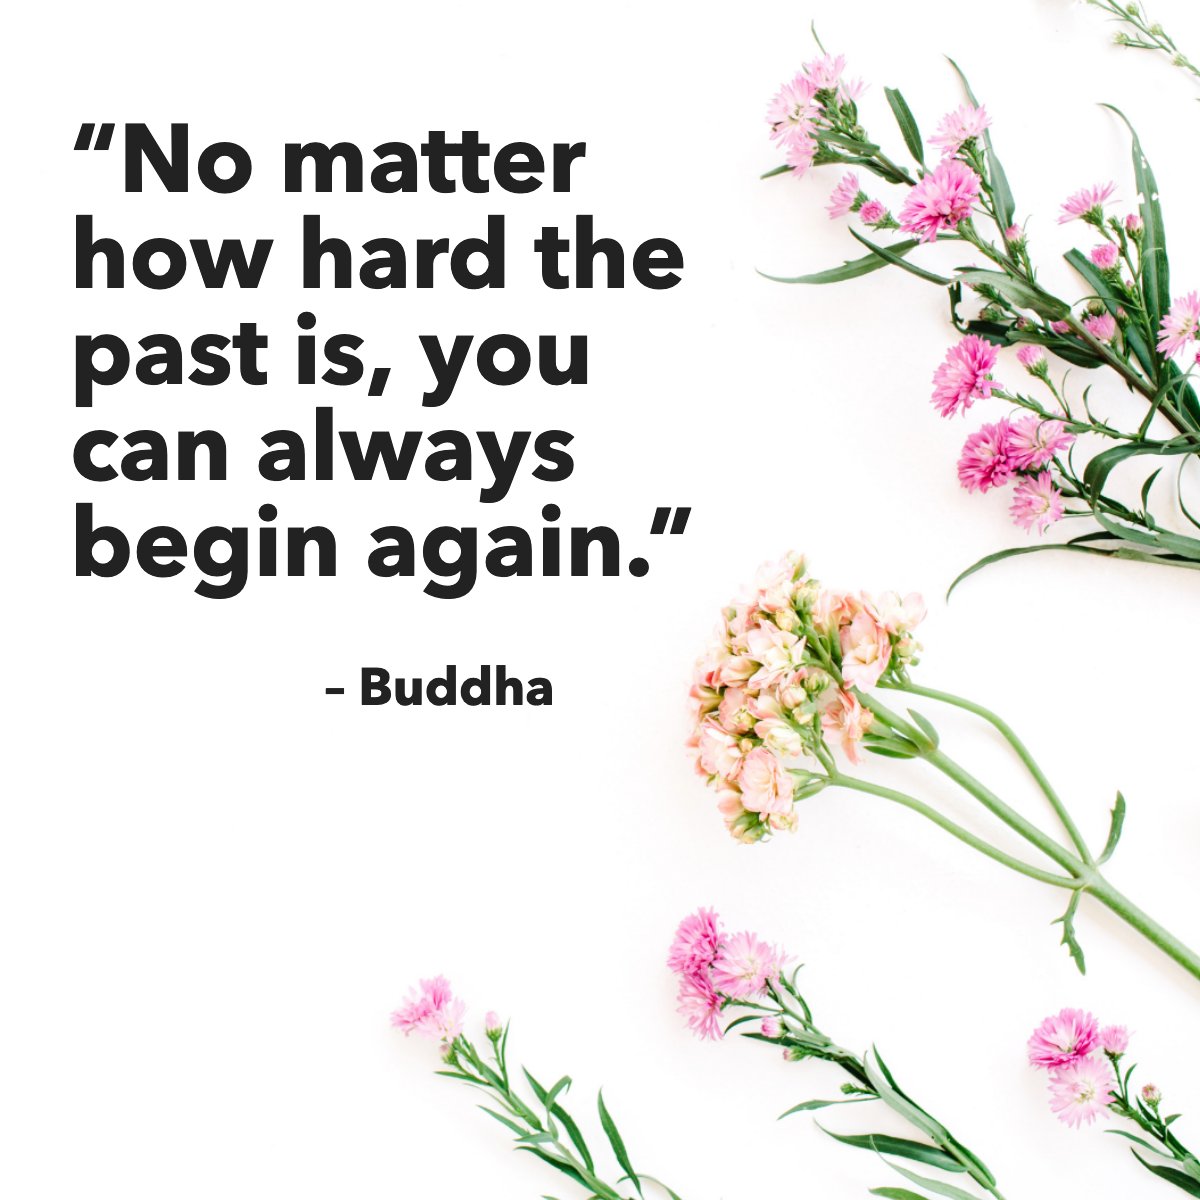 'No matter how hard the past is, you can always begin again.' 🙏 
– Buddha

What are you beginning this week? Drop us a line in the comments.

#flowers #florals #quote #newbeginnings #buddha
 #realtynewengland #mannymenezesgroup #realtyne #wesellnewengland